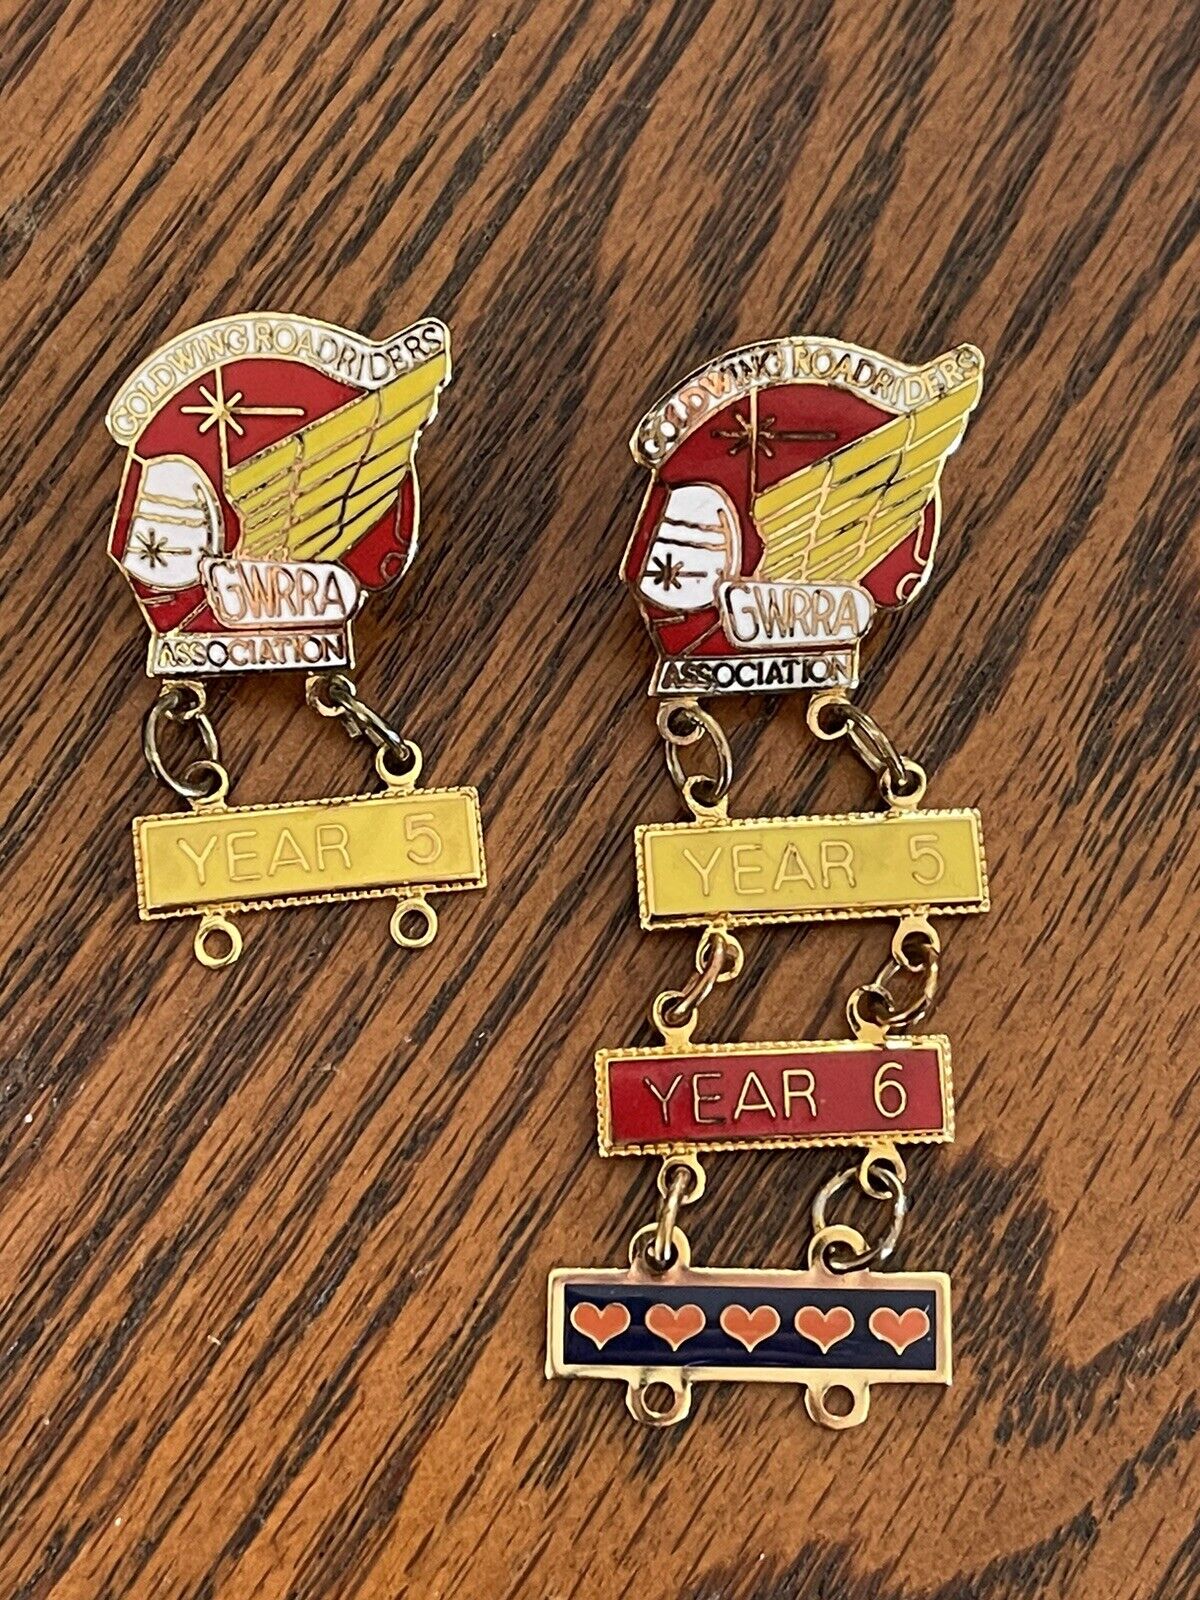 2 HONDA Goldwing ROADRIDERS Pins GWRRA Association Pins with Years 5 And 6